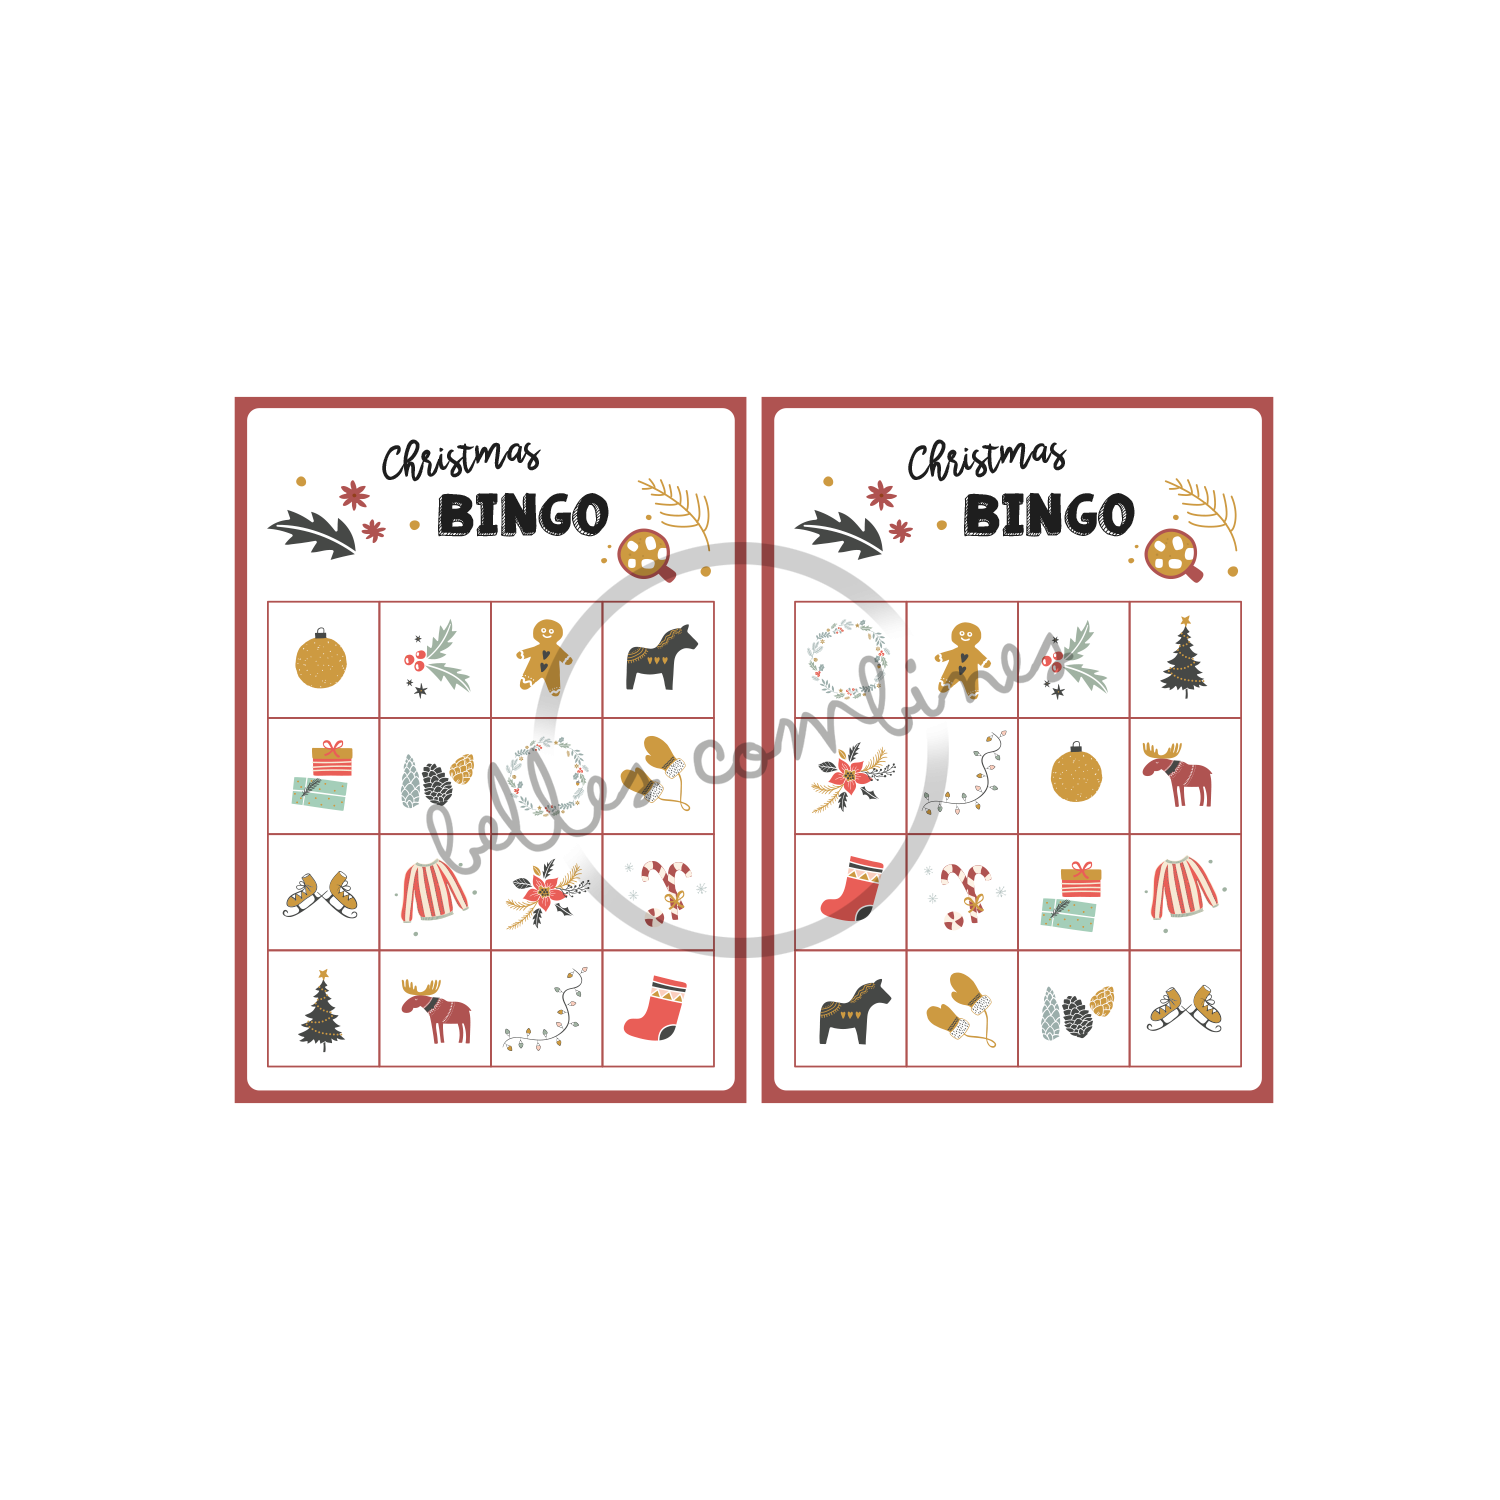 English Version of the play sheets of the christmas bingo made by Les Belles Combines